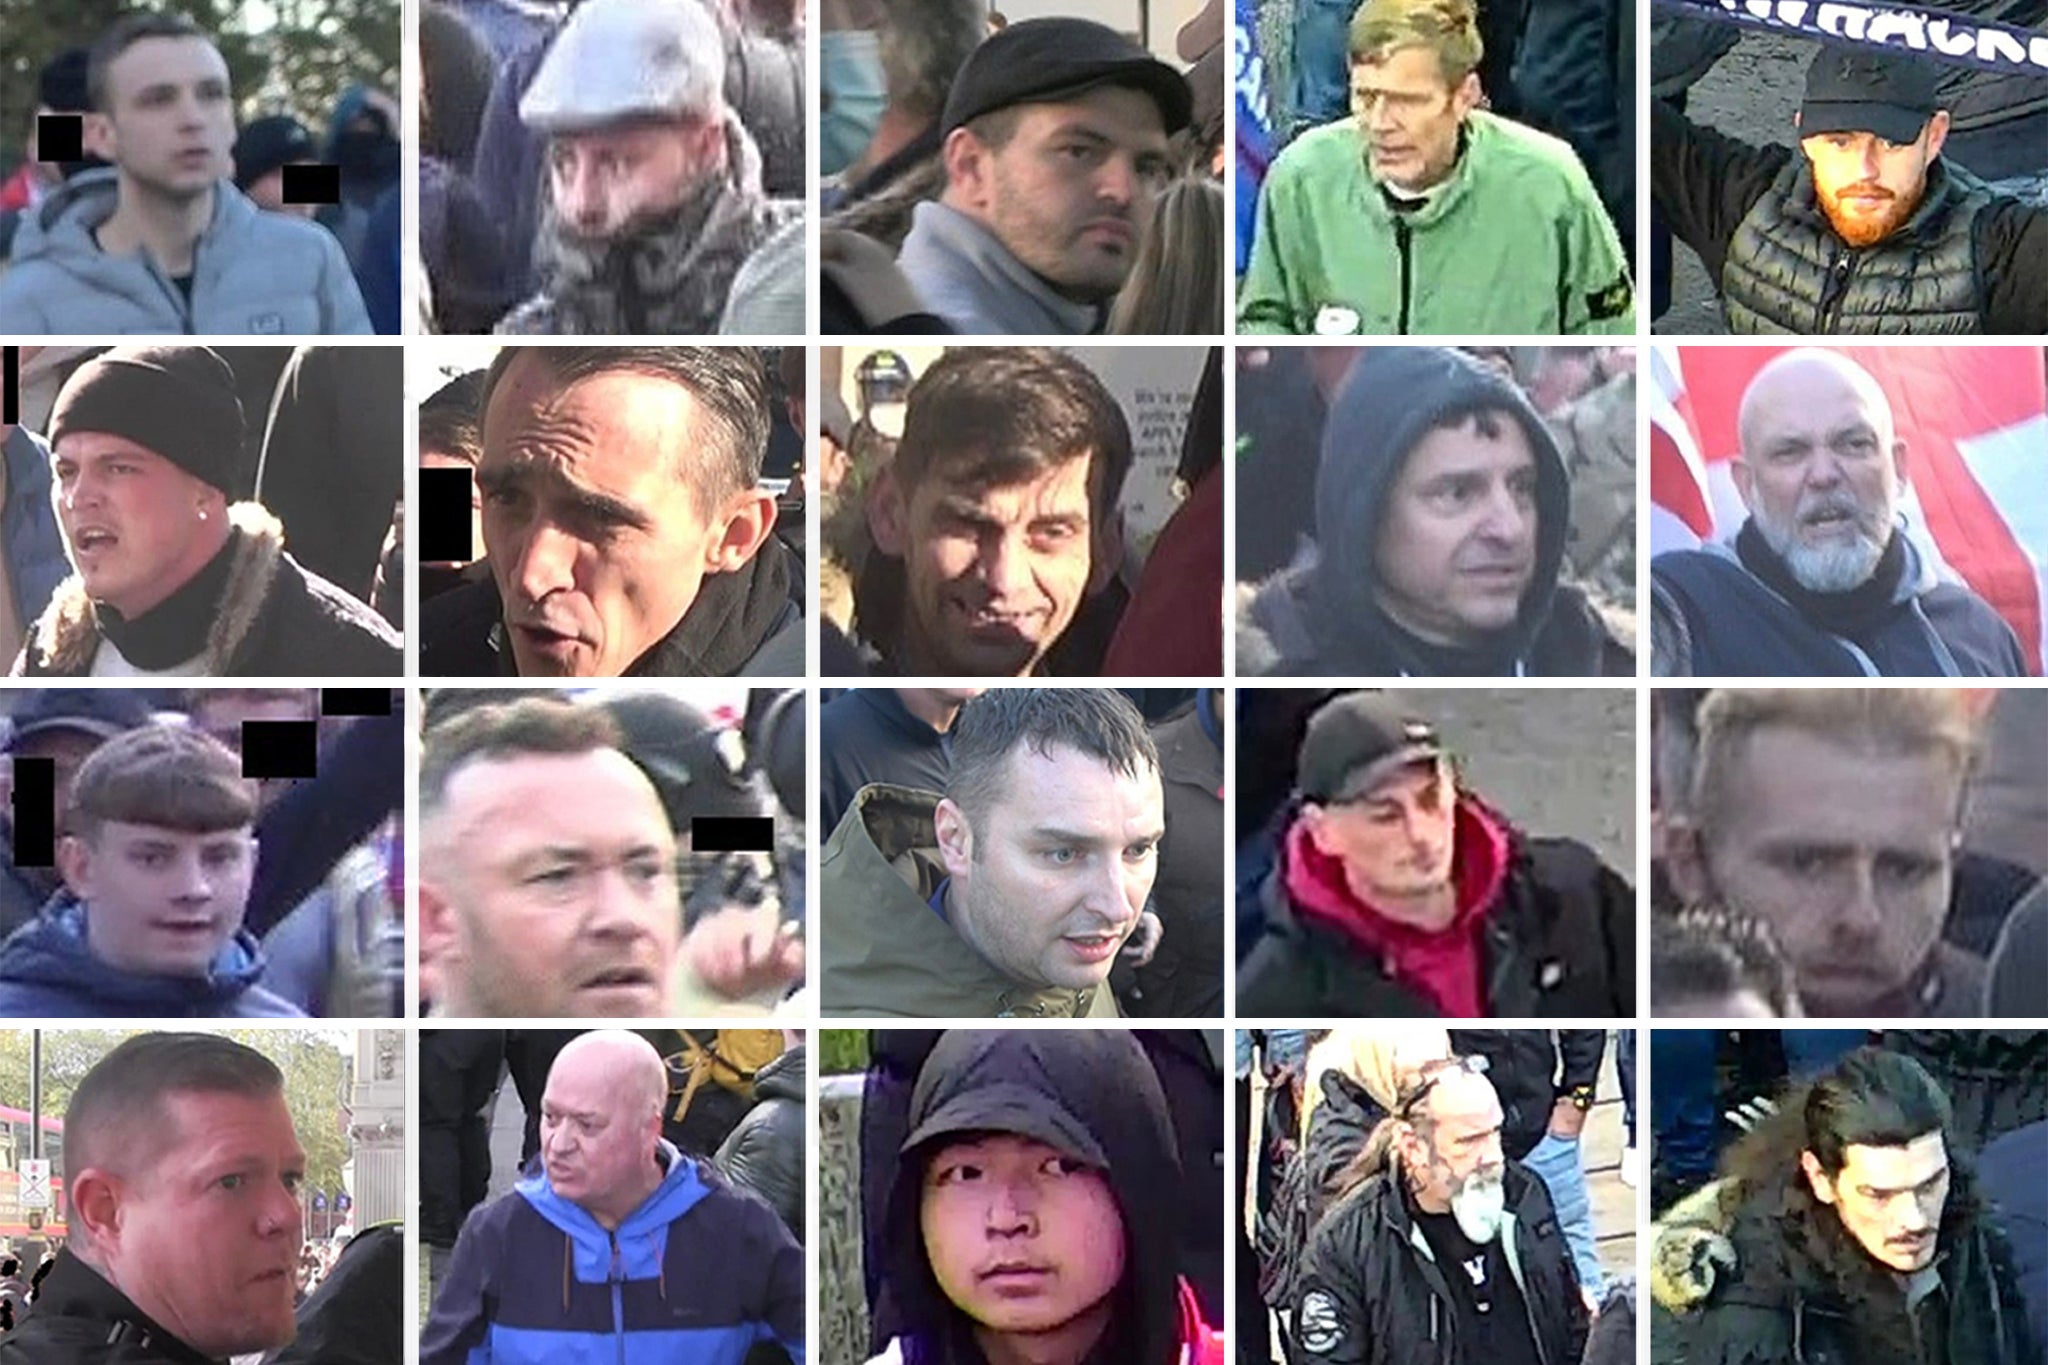 Metropolitan Police handout photo of the 20 men they would like to identify who took part in a counter-protest